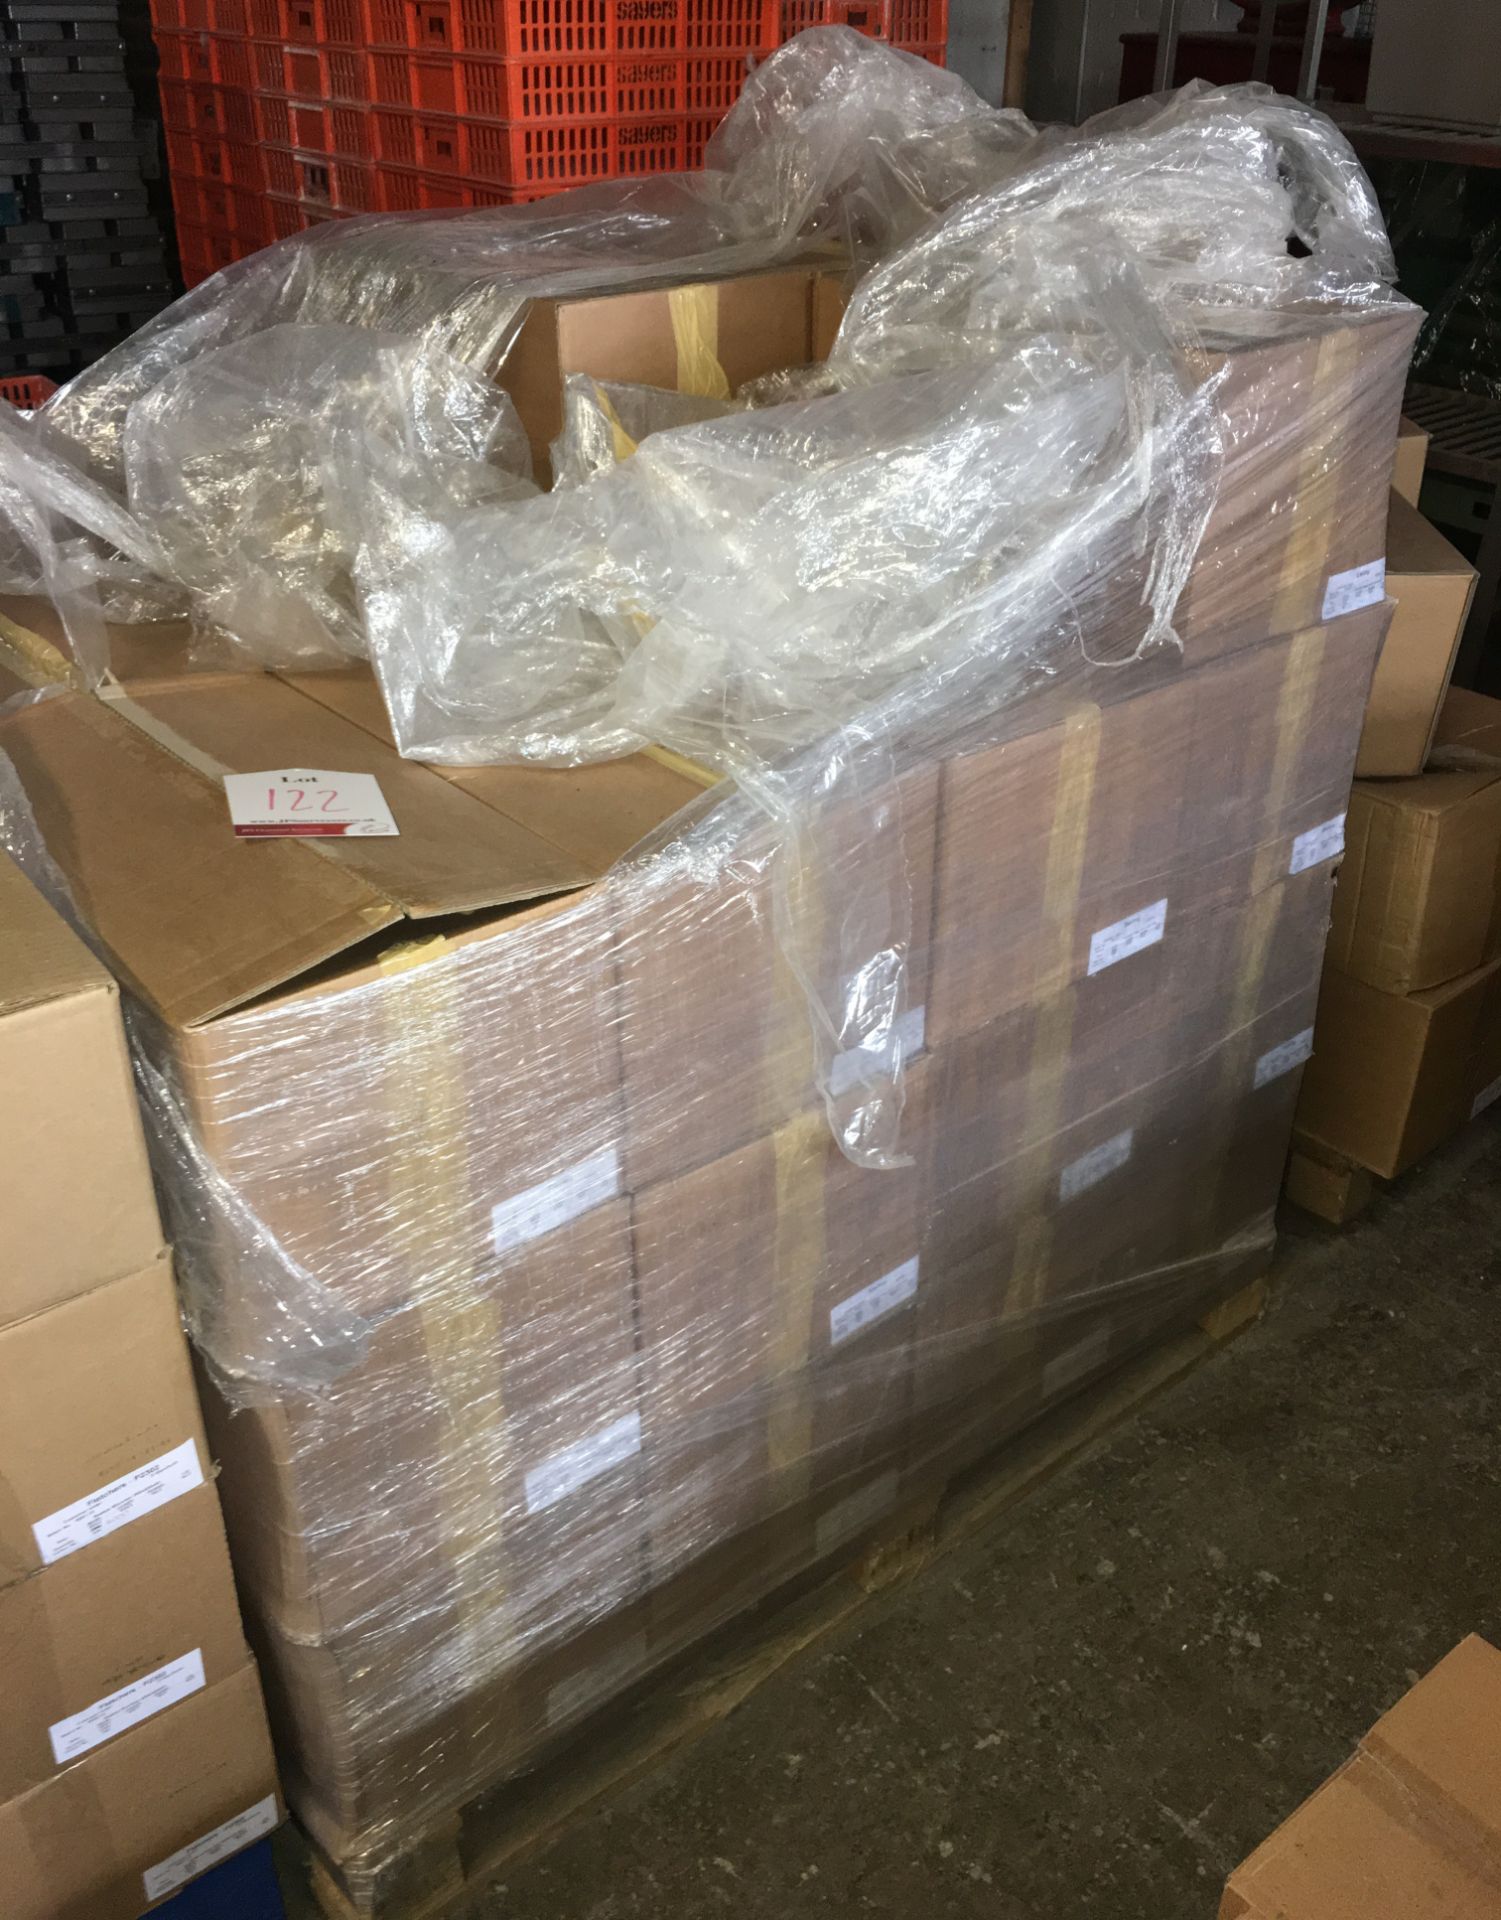 80 x Boxes of Sterling 'BRANDED' Plastic Packaging Bags - 2100 per Box